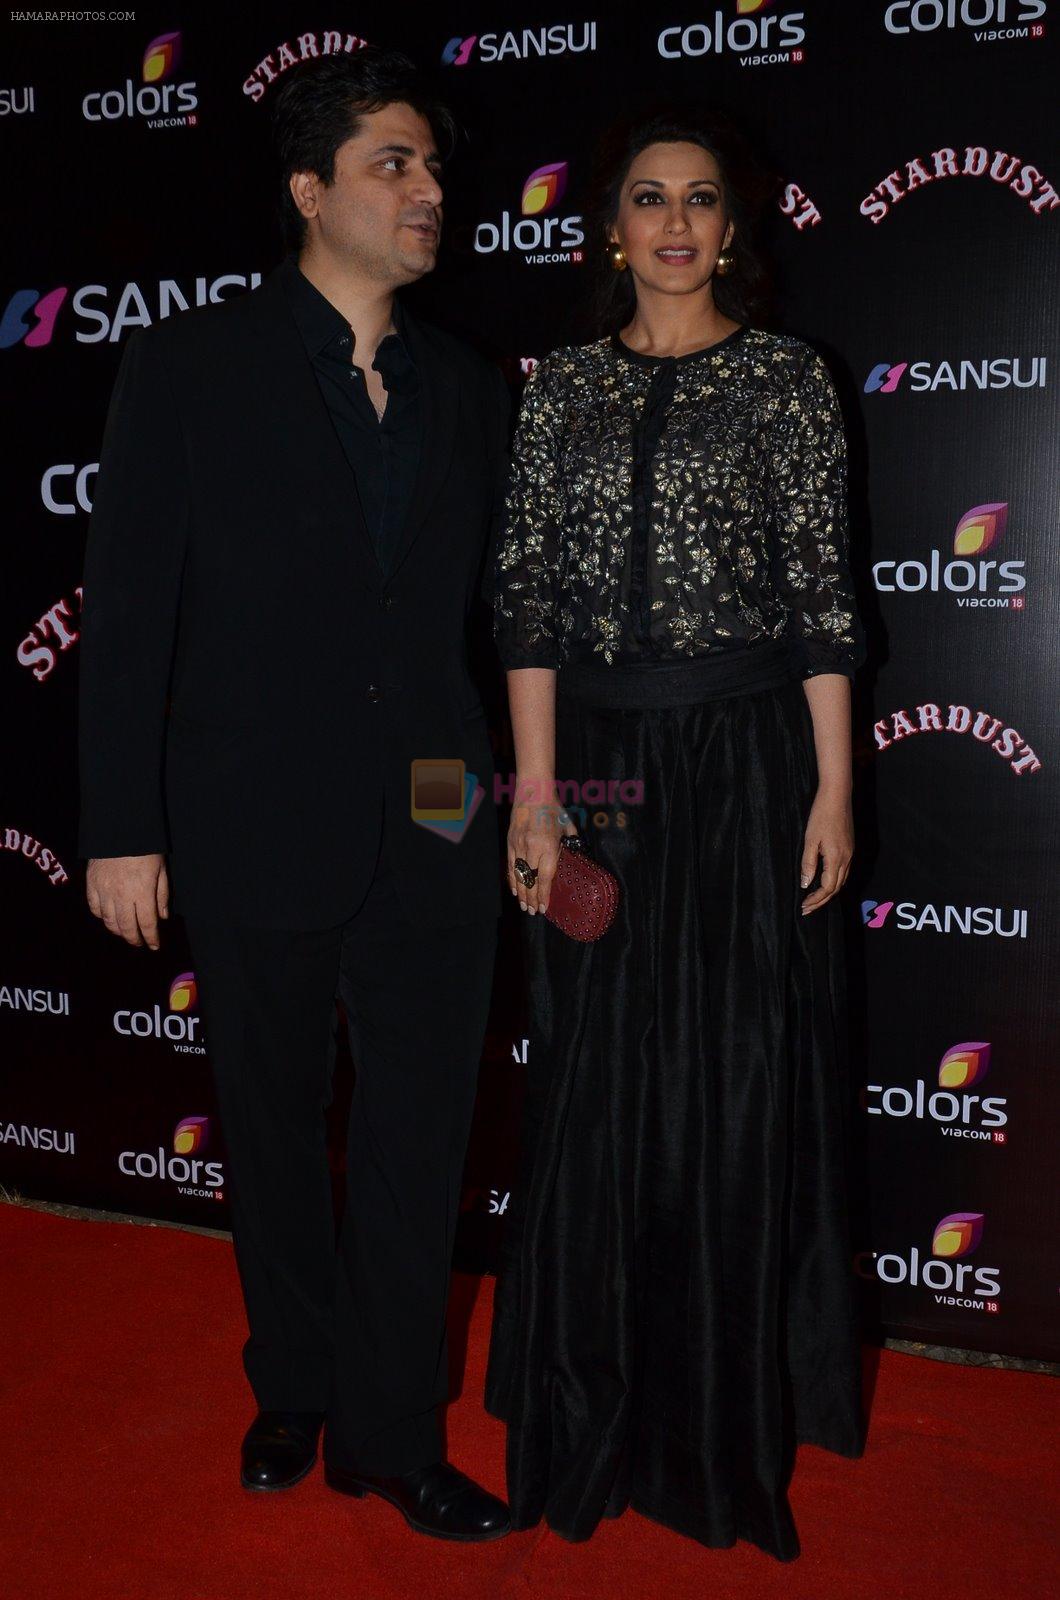 Sonali bendre, Goldie Behl at Stardust Awards 2014 in Mumbai on 14th Dec 2014